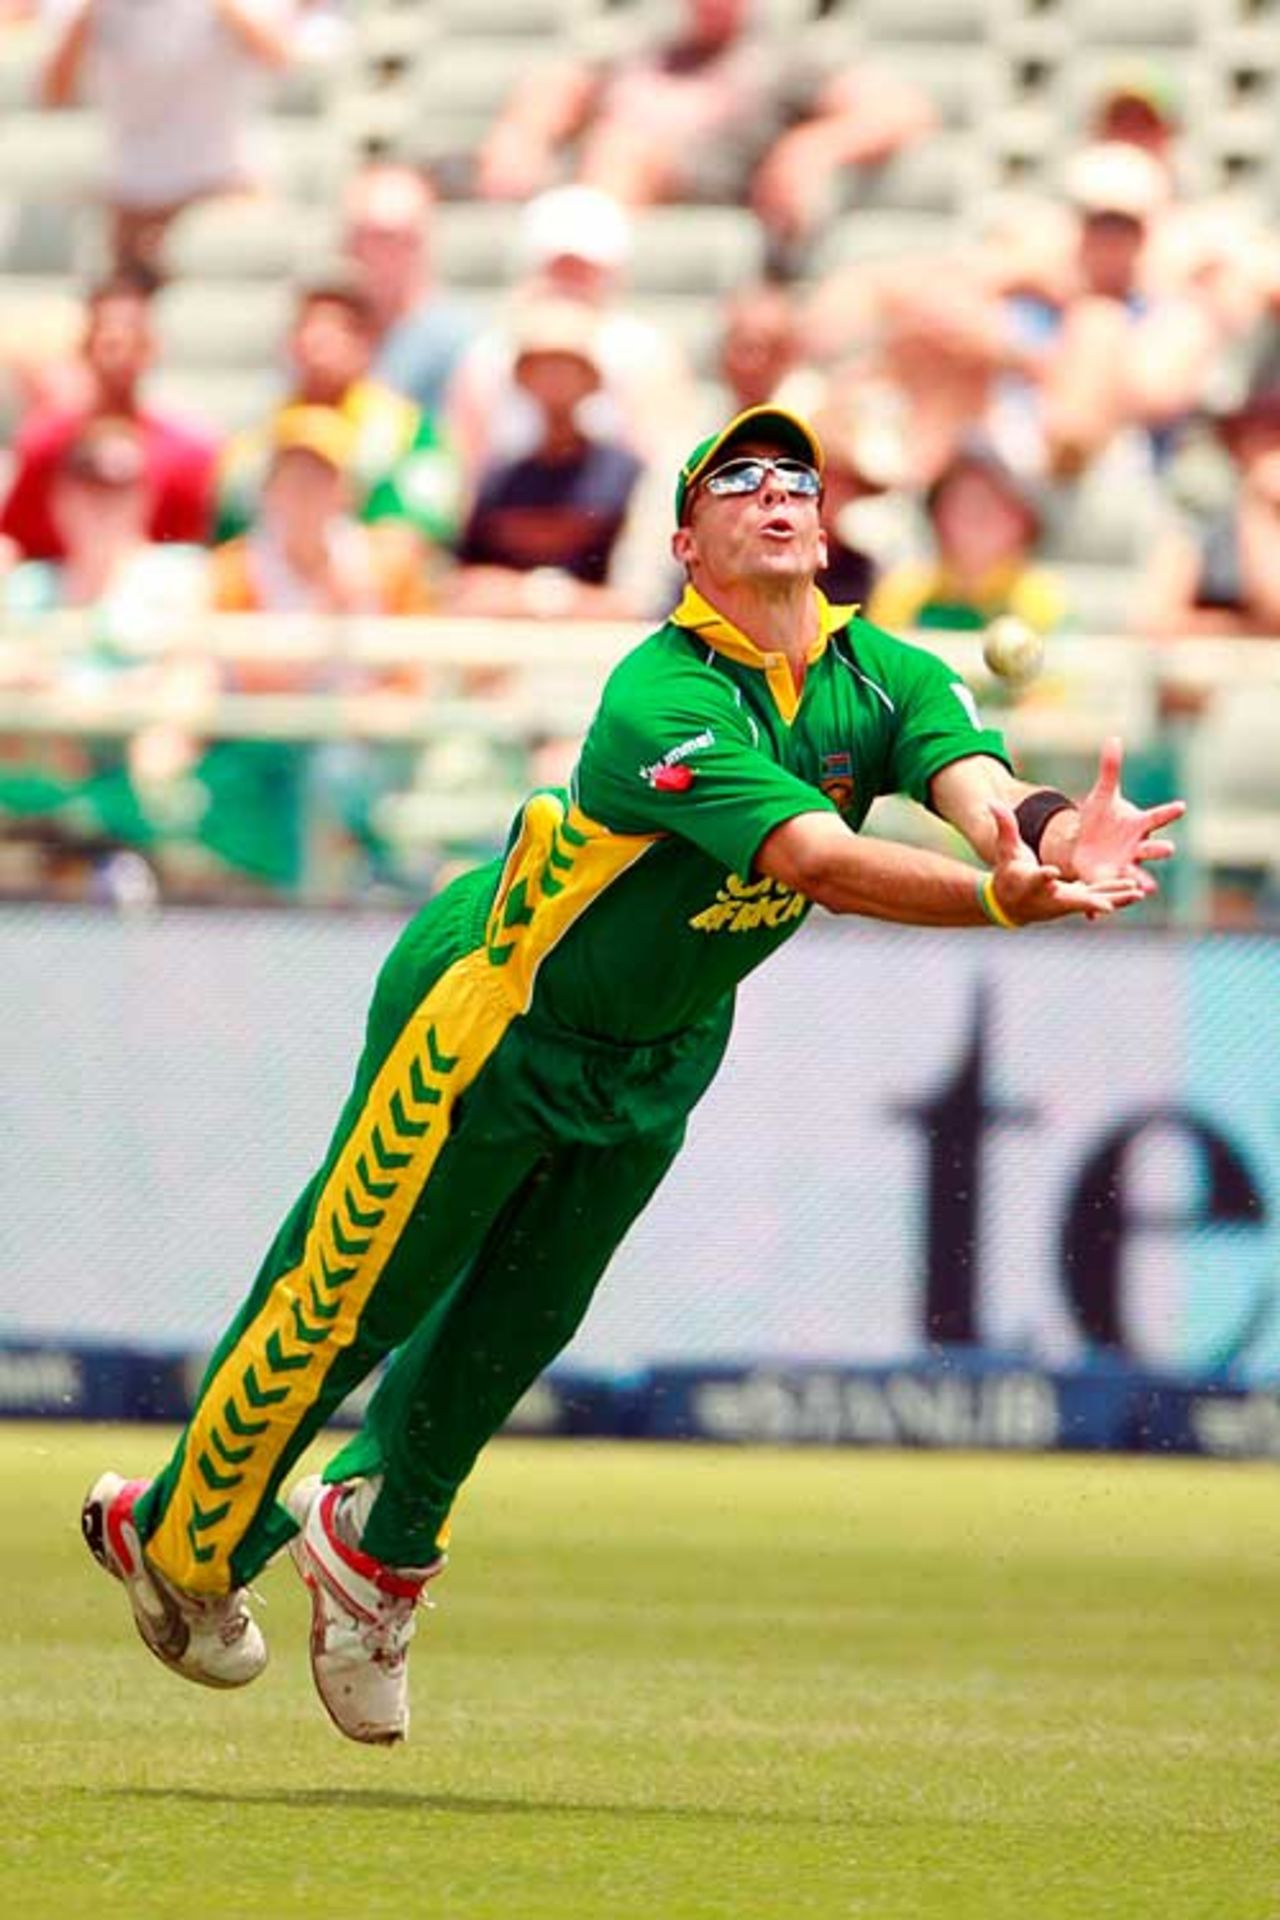 Andre Nel at full stretch to catch Scott Styris, South Africa v New Zealand, 3rd ODI, Cape Town, December 2, 2007